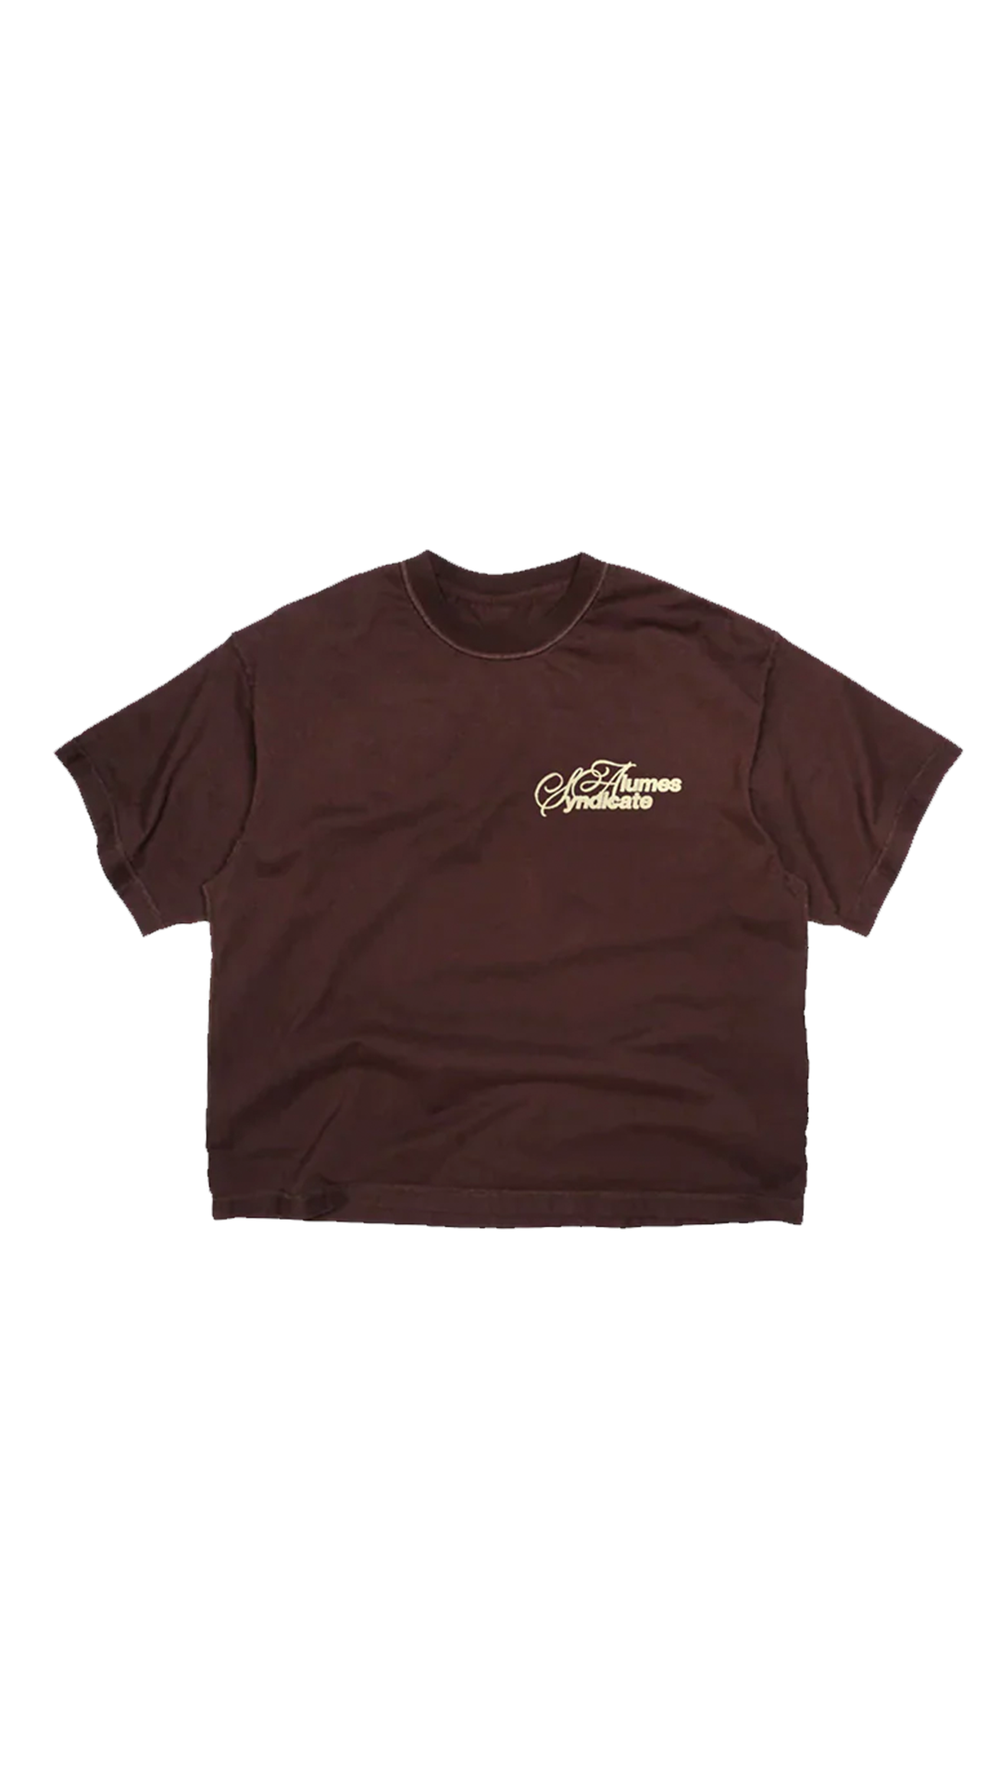 ALUMES SYNDICATE T-SHIRT BROWN